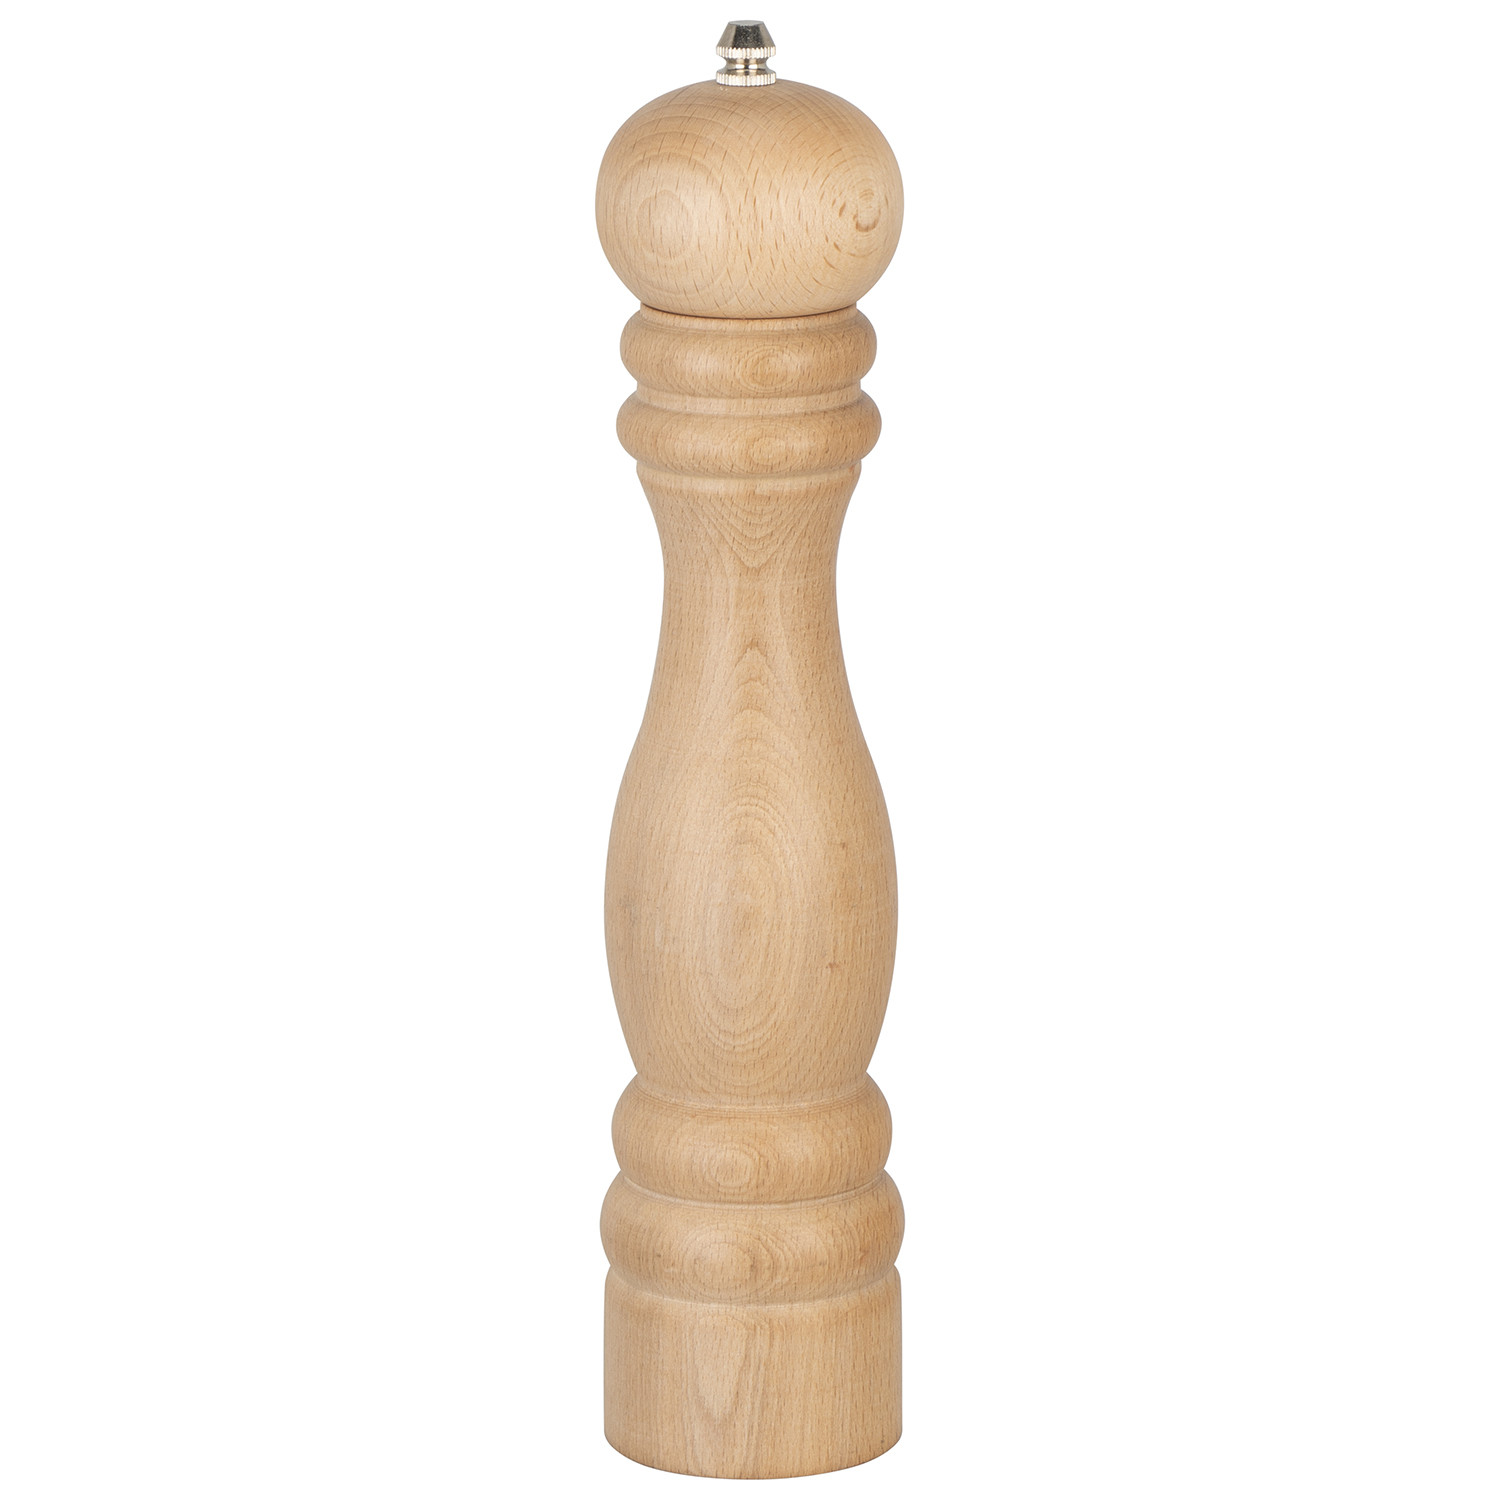 Cotswold Wooden Salt and Pepper Mill Image